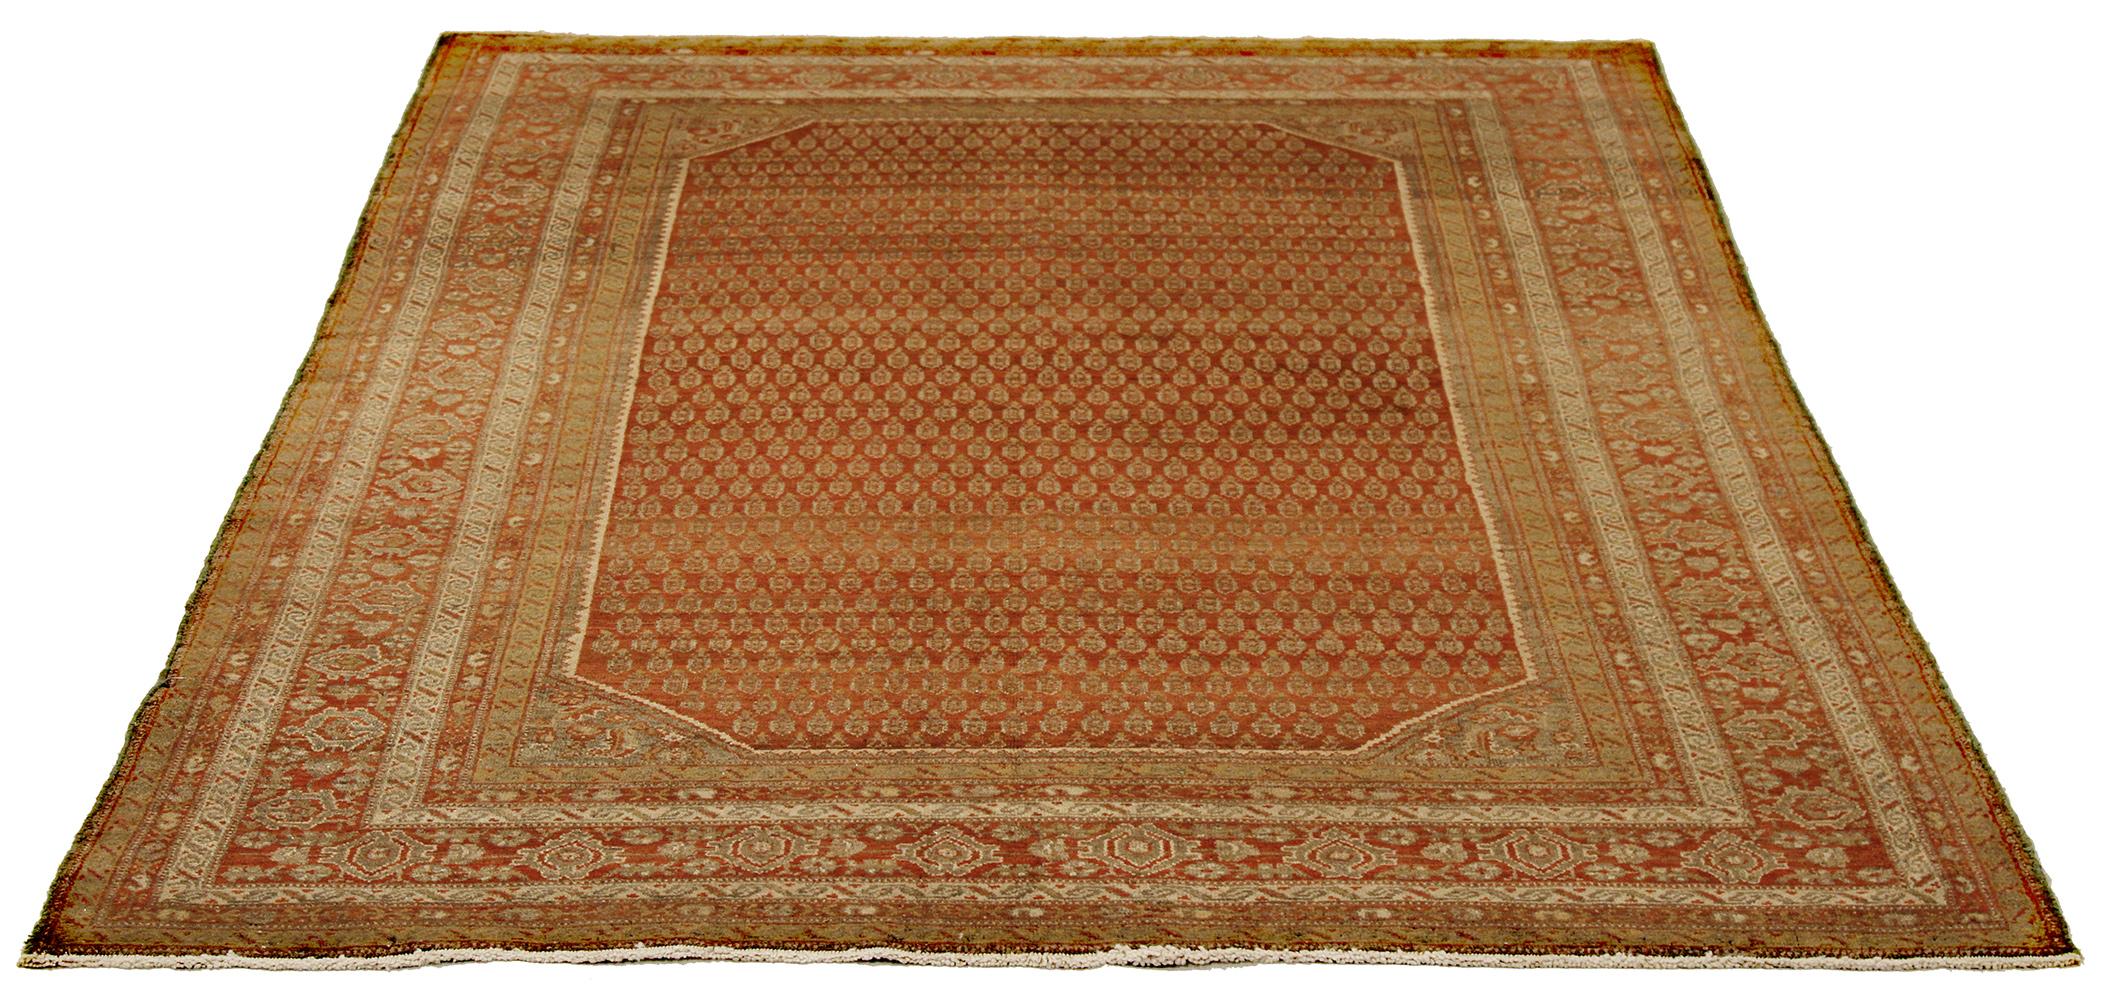 Antique Persian runner rug handwoven from the finest sheep’s wool and colored with all-natural vegetable dyes that are safe for humans and pets. It’s a traditional Malayer design featuring ivory and beige ‘Boteh’ details over a rich red field. It’s